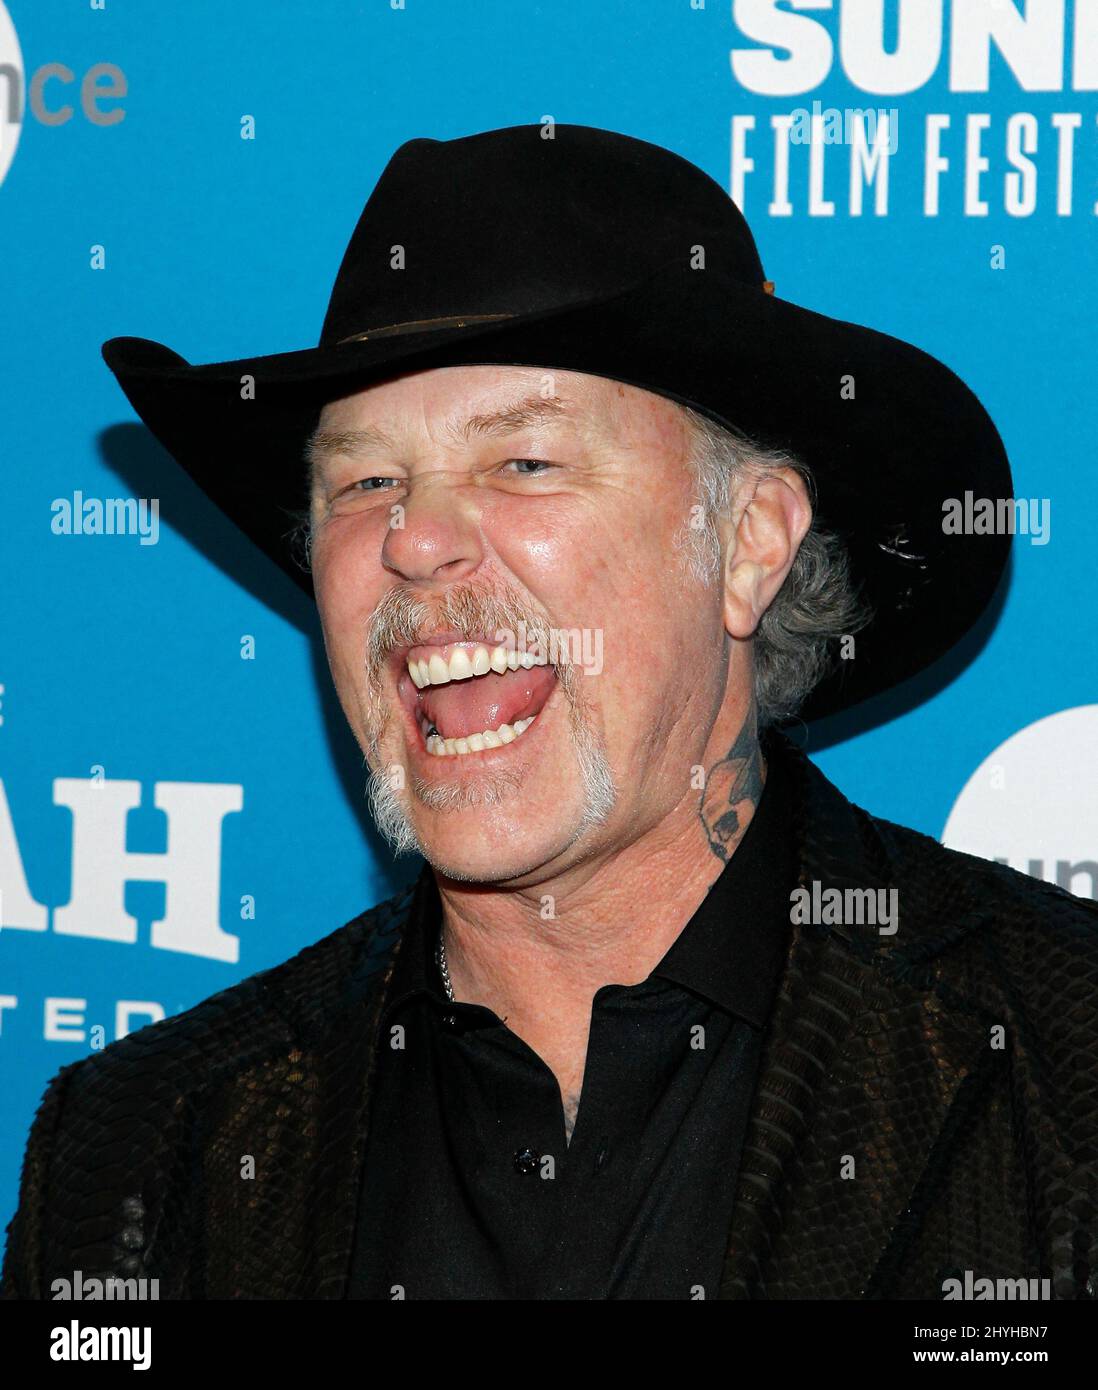 James Hetfield at the premiere of 'Extremely Wicked, Shockingly Evil And Vile' during the 2019 Sundance Film Festival held at the Eccles Theatre on January 26, 2019 in Park City, UT. Stock Photo